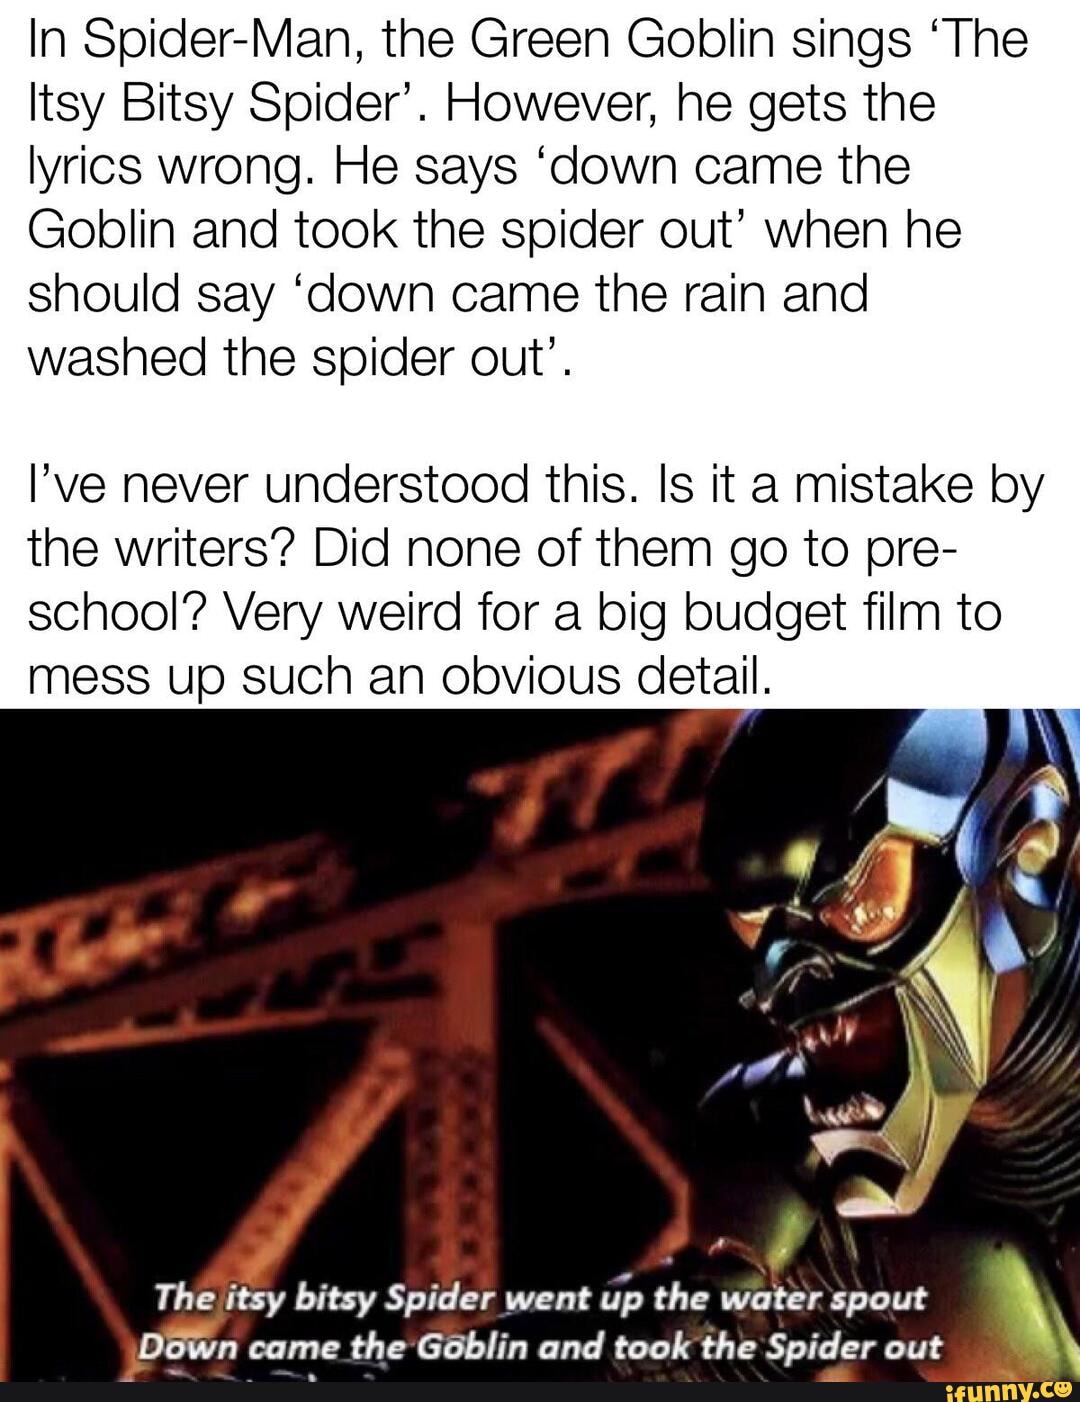 In Spider-Man, the Green Goblin sings 'The Itsy Bitsy Spider'. However, he  gets the lyrics